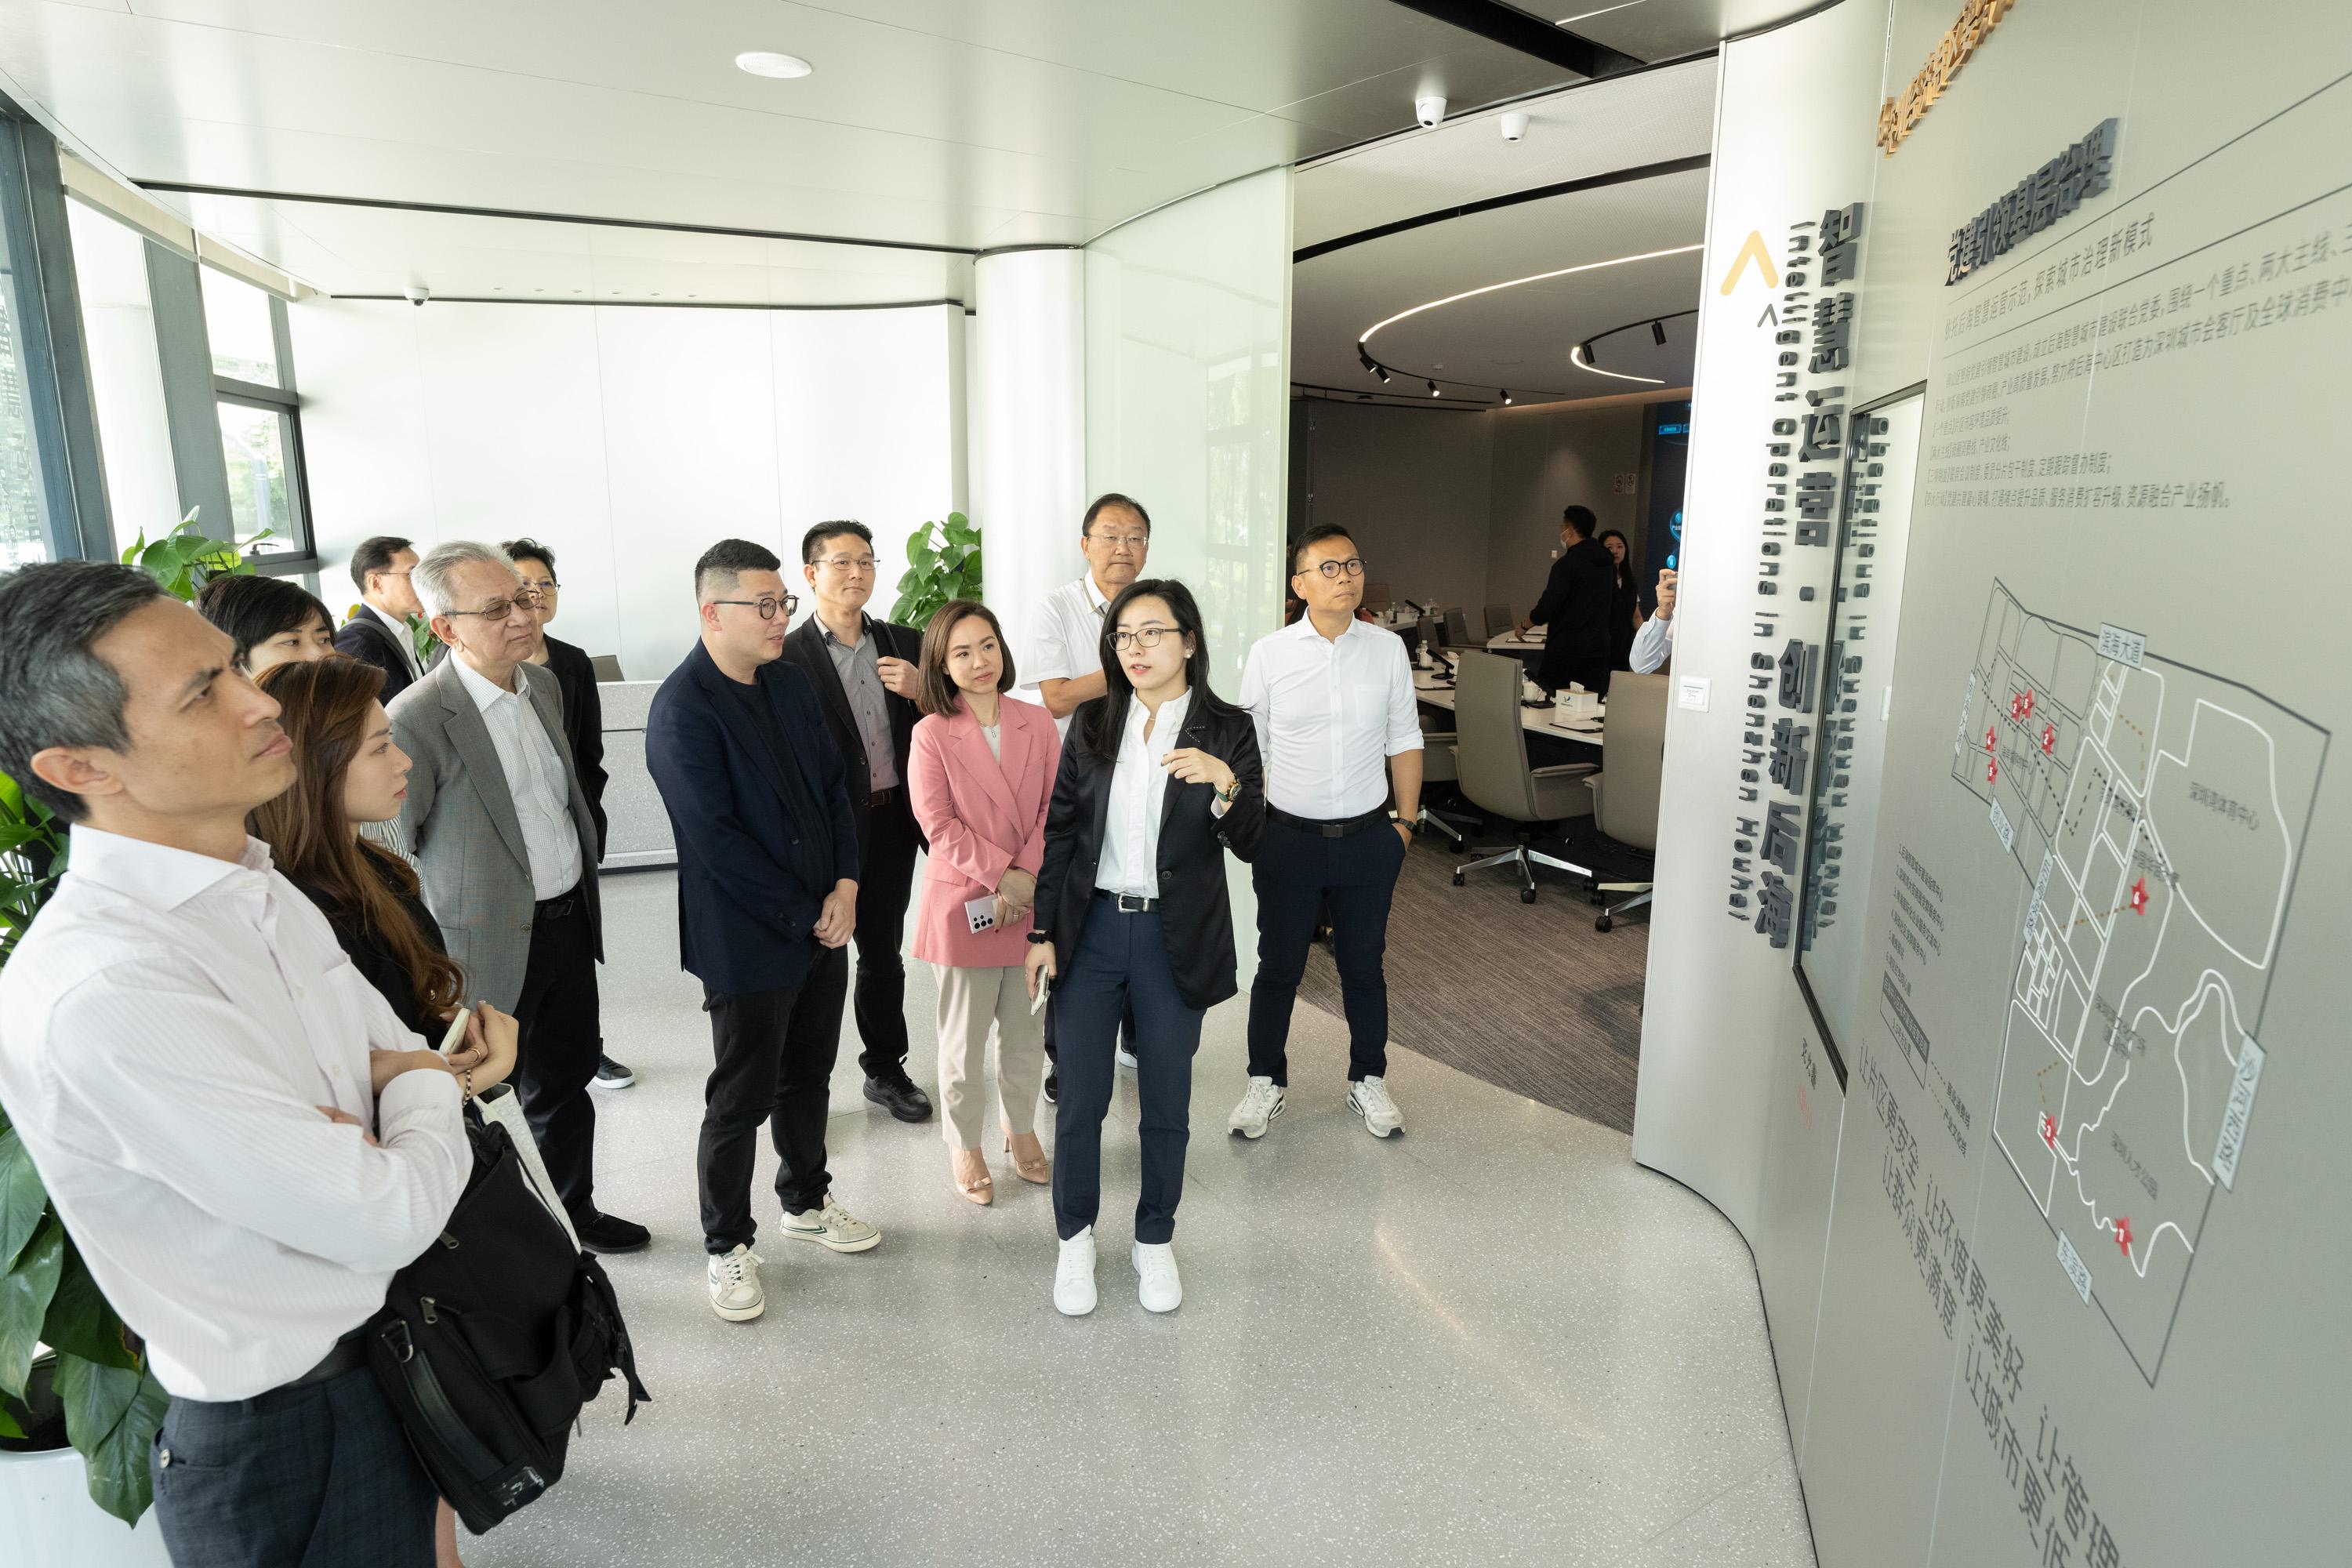 The Legislative Council (LegCo) Subcommittee on Matters Relating to the Development of the Northern Metropolis conducted a duty visit to Shenzhen today (May 16). LegCo Members and representatives of the Government visited Houhai Smart Operations Centre.